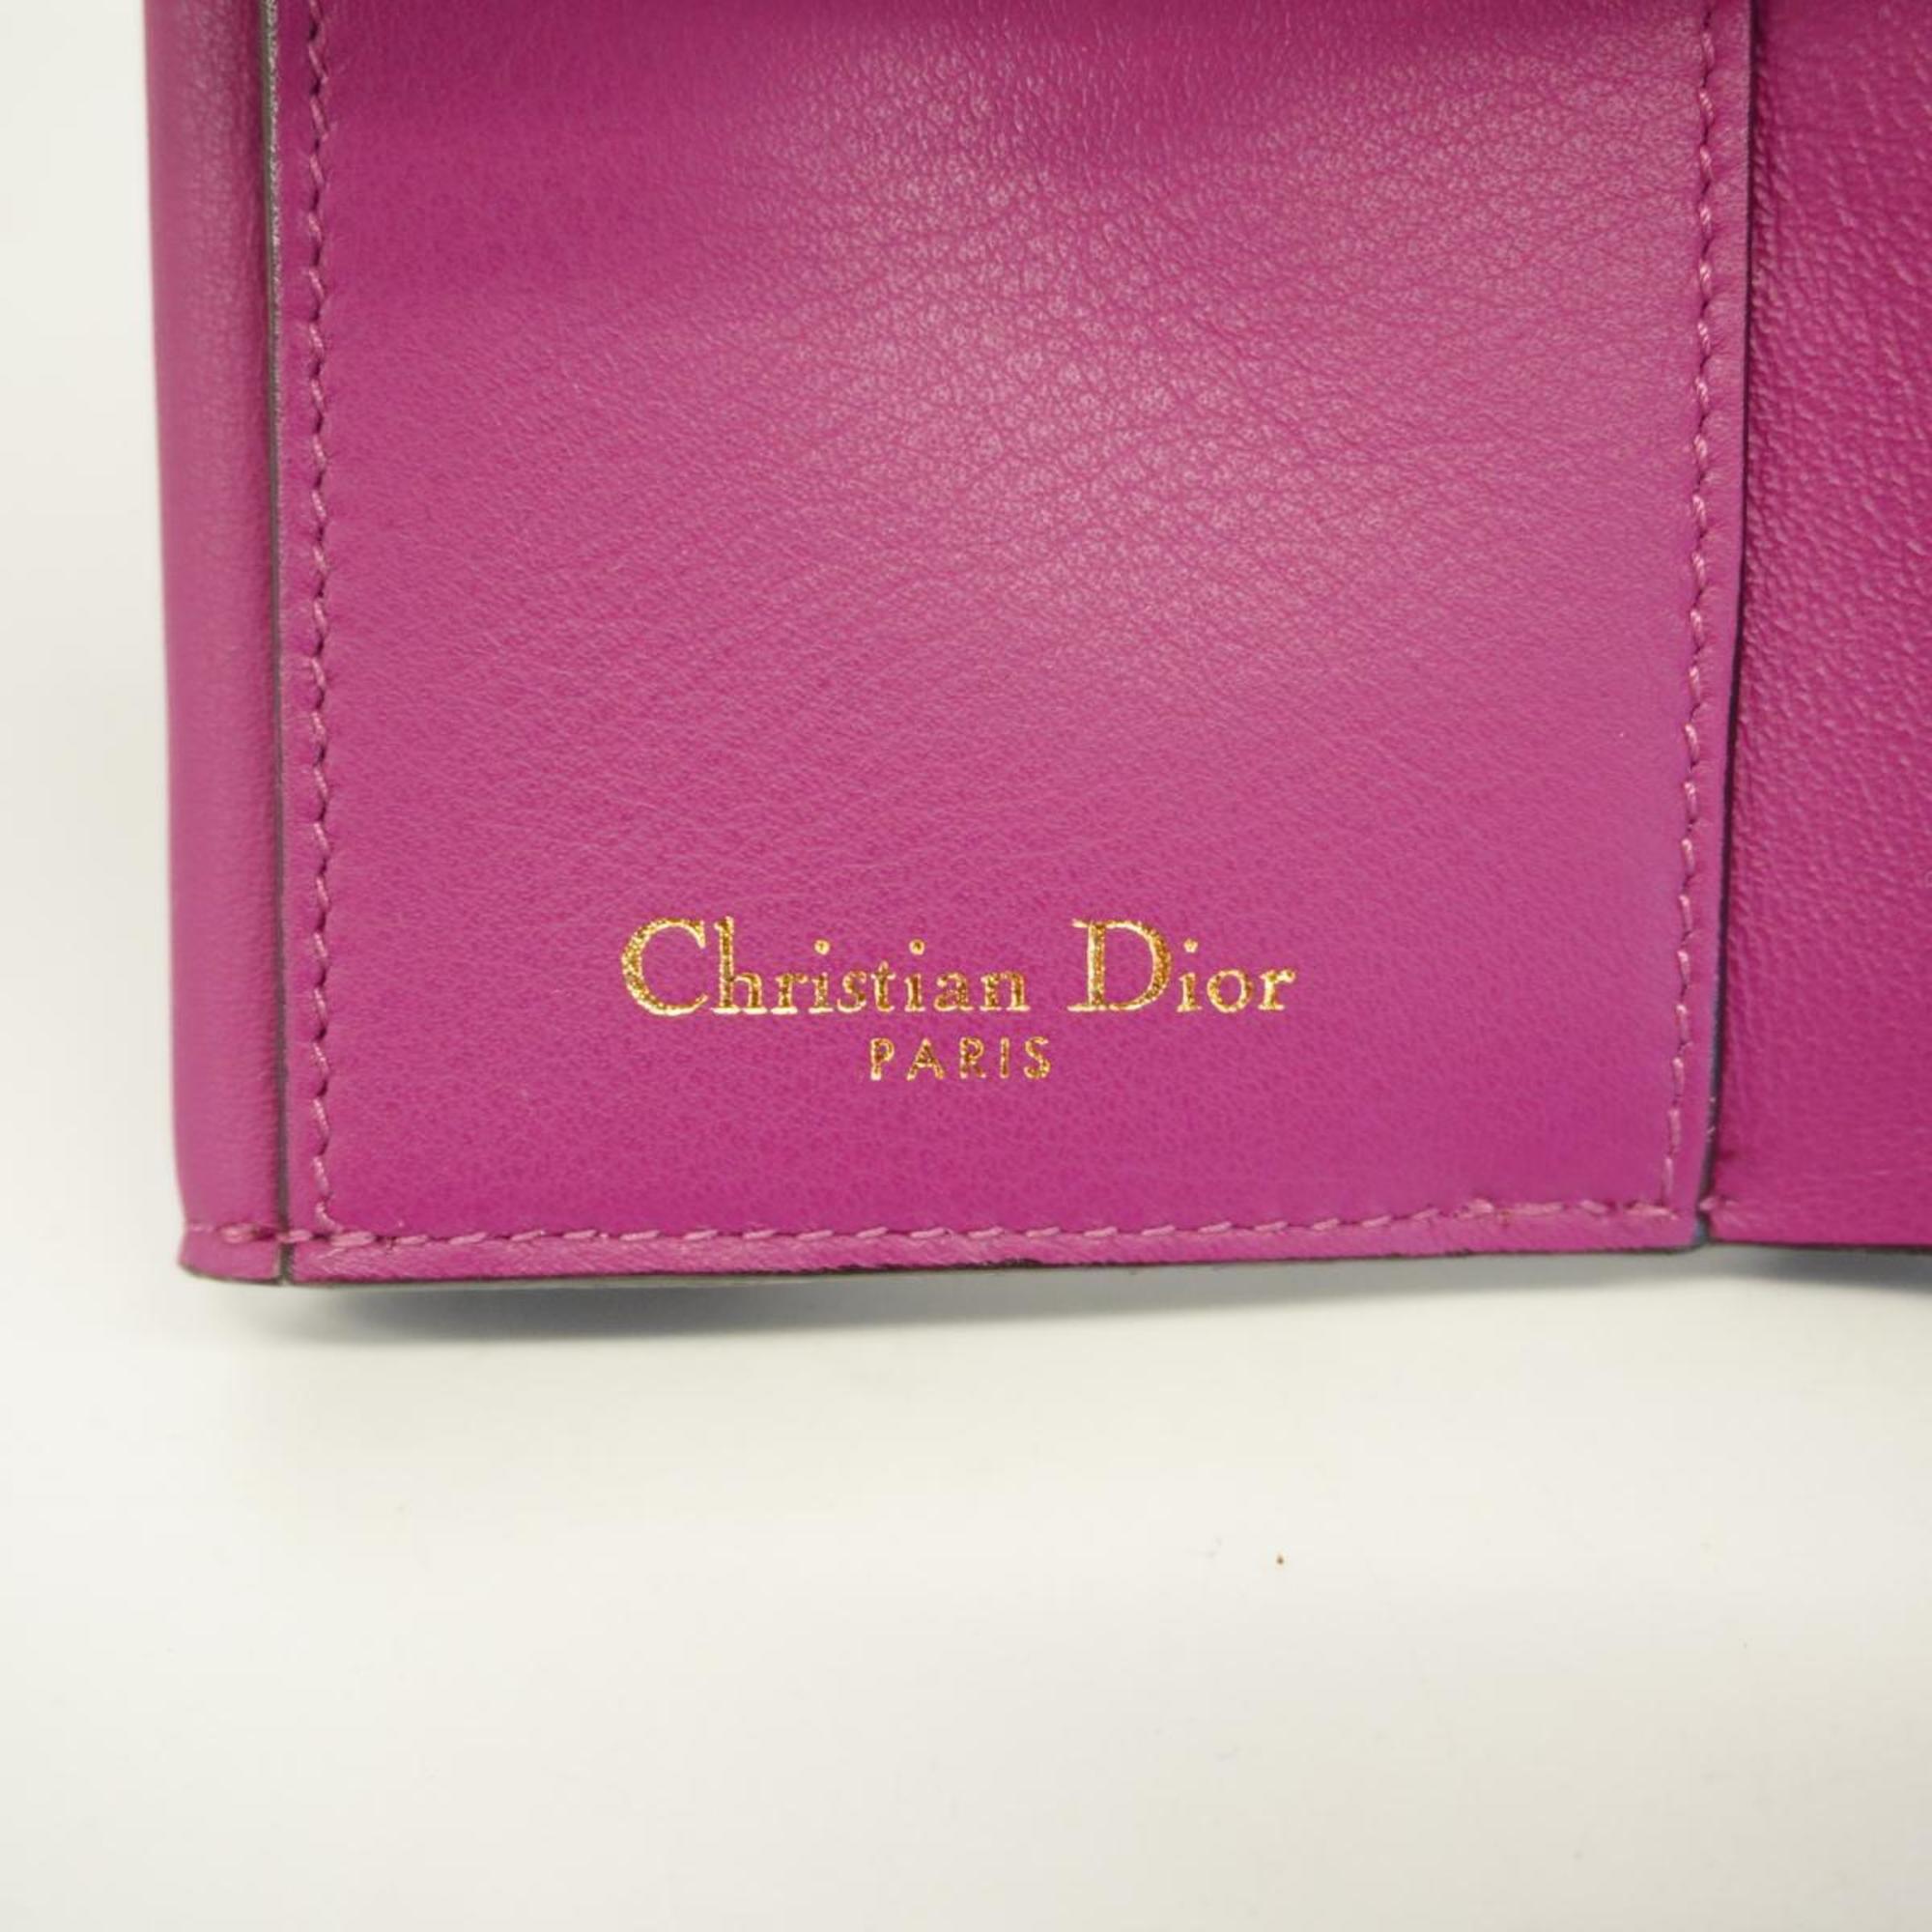 Christian Dior Tri-fold Wallet Leather Black Champagne Women's